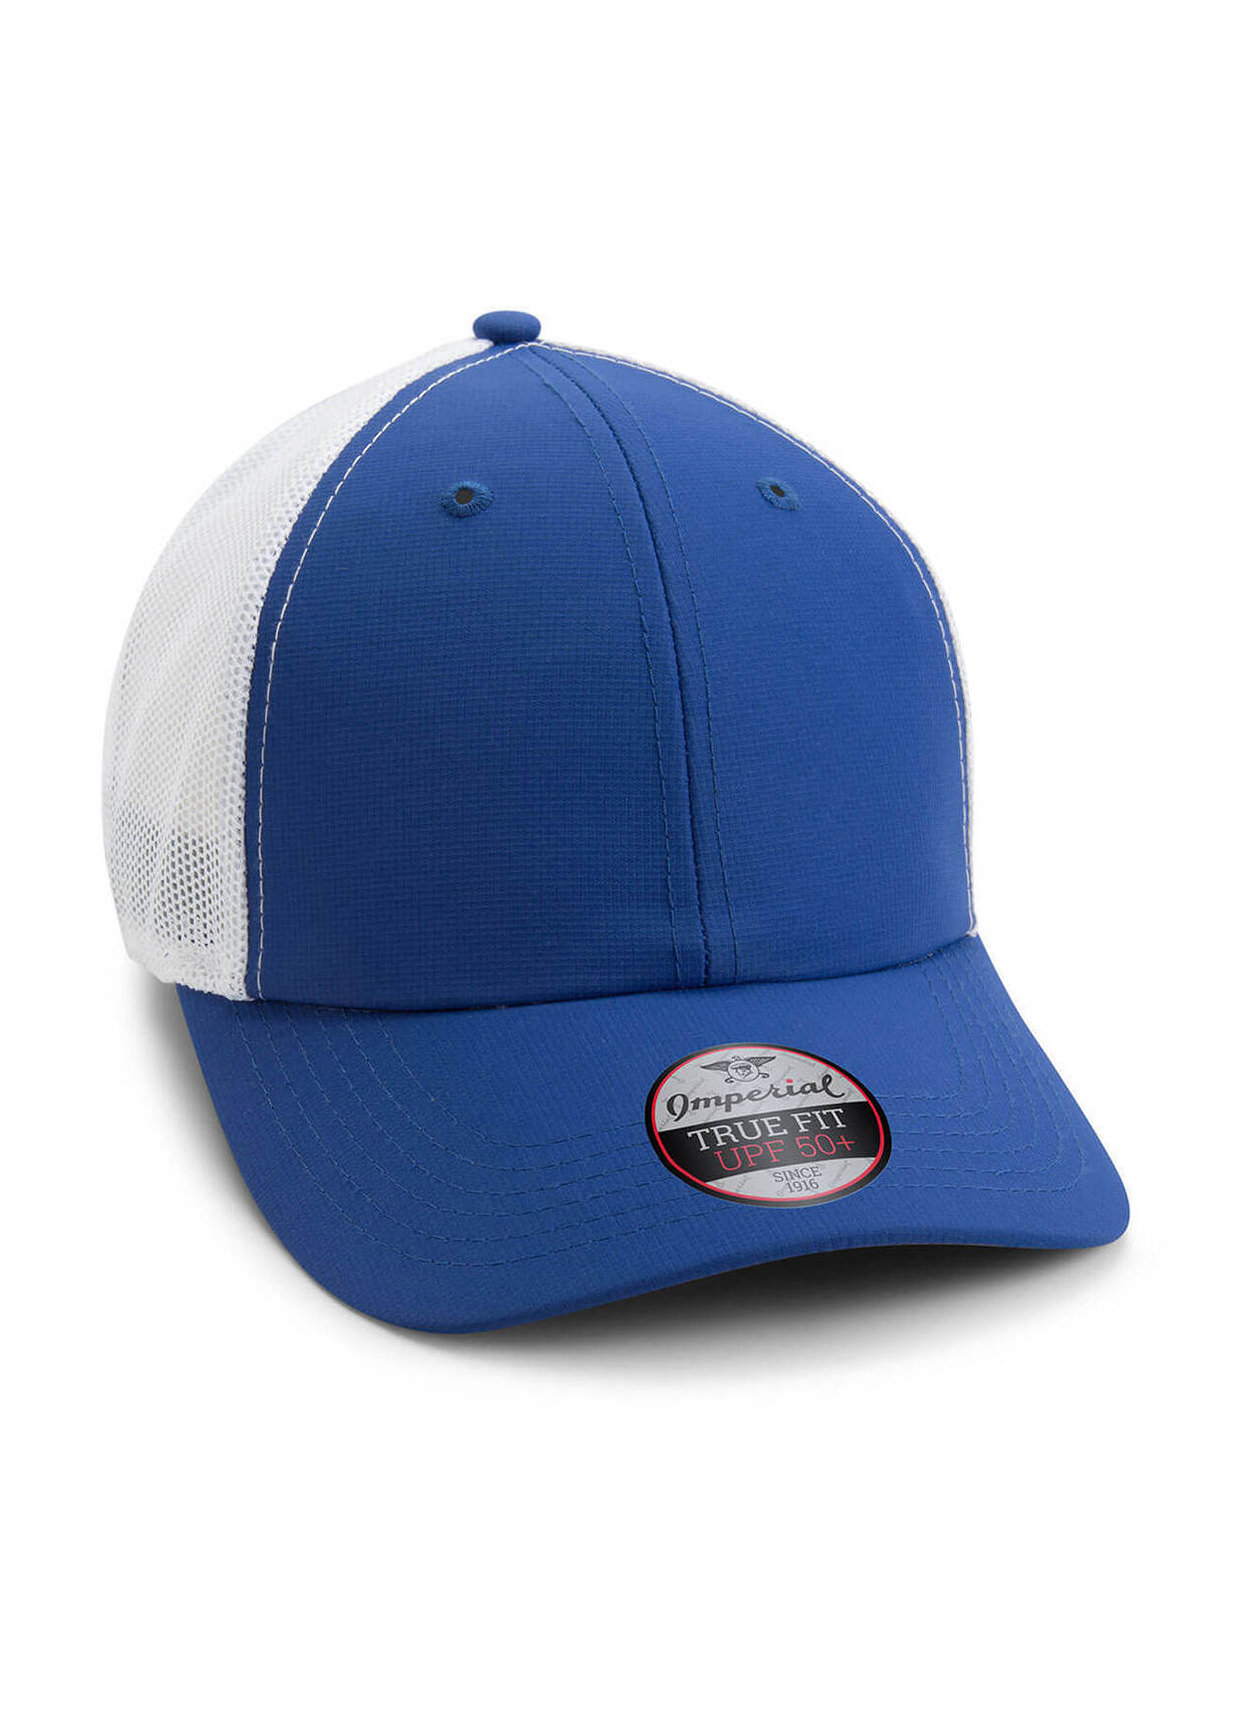 Imperial Cobalt / White Structured Performance Meshback Hat